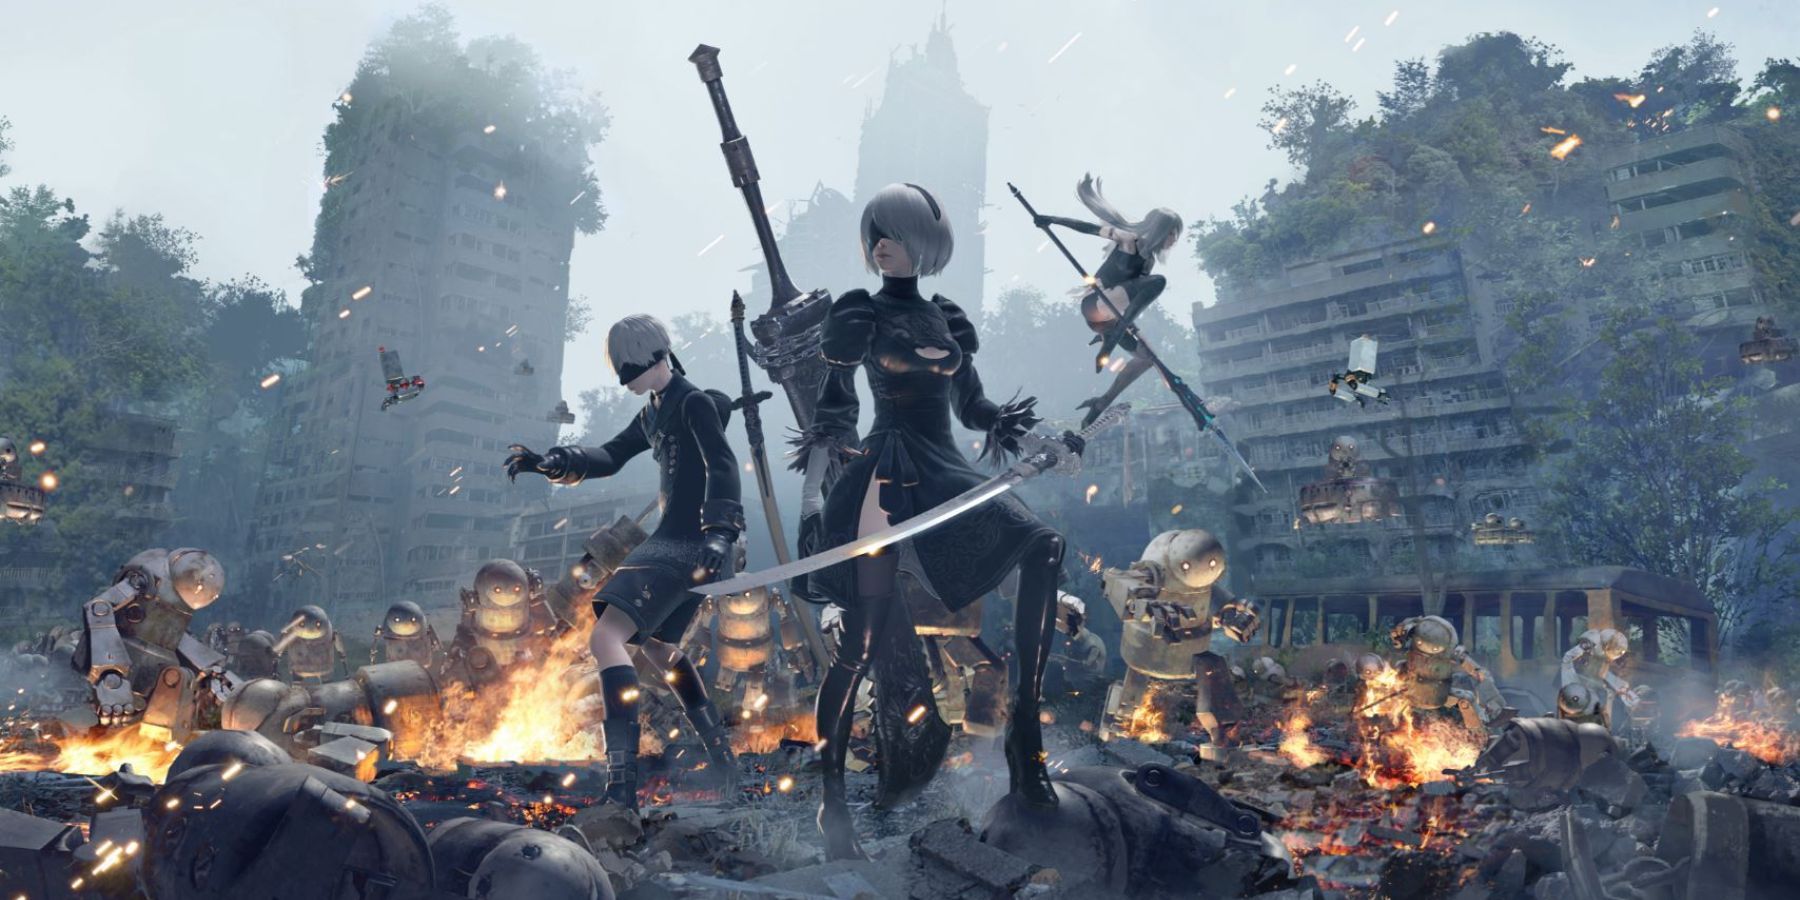 2B and 9S bracing themselves against an army of automatons in NieR: Automata